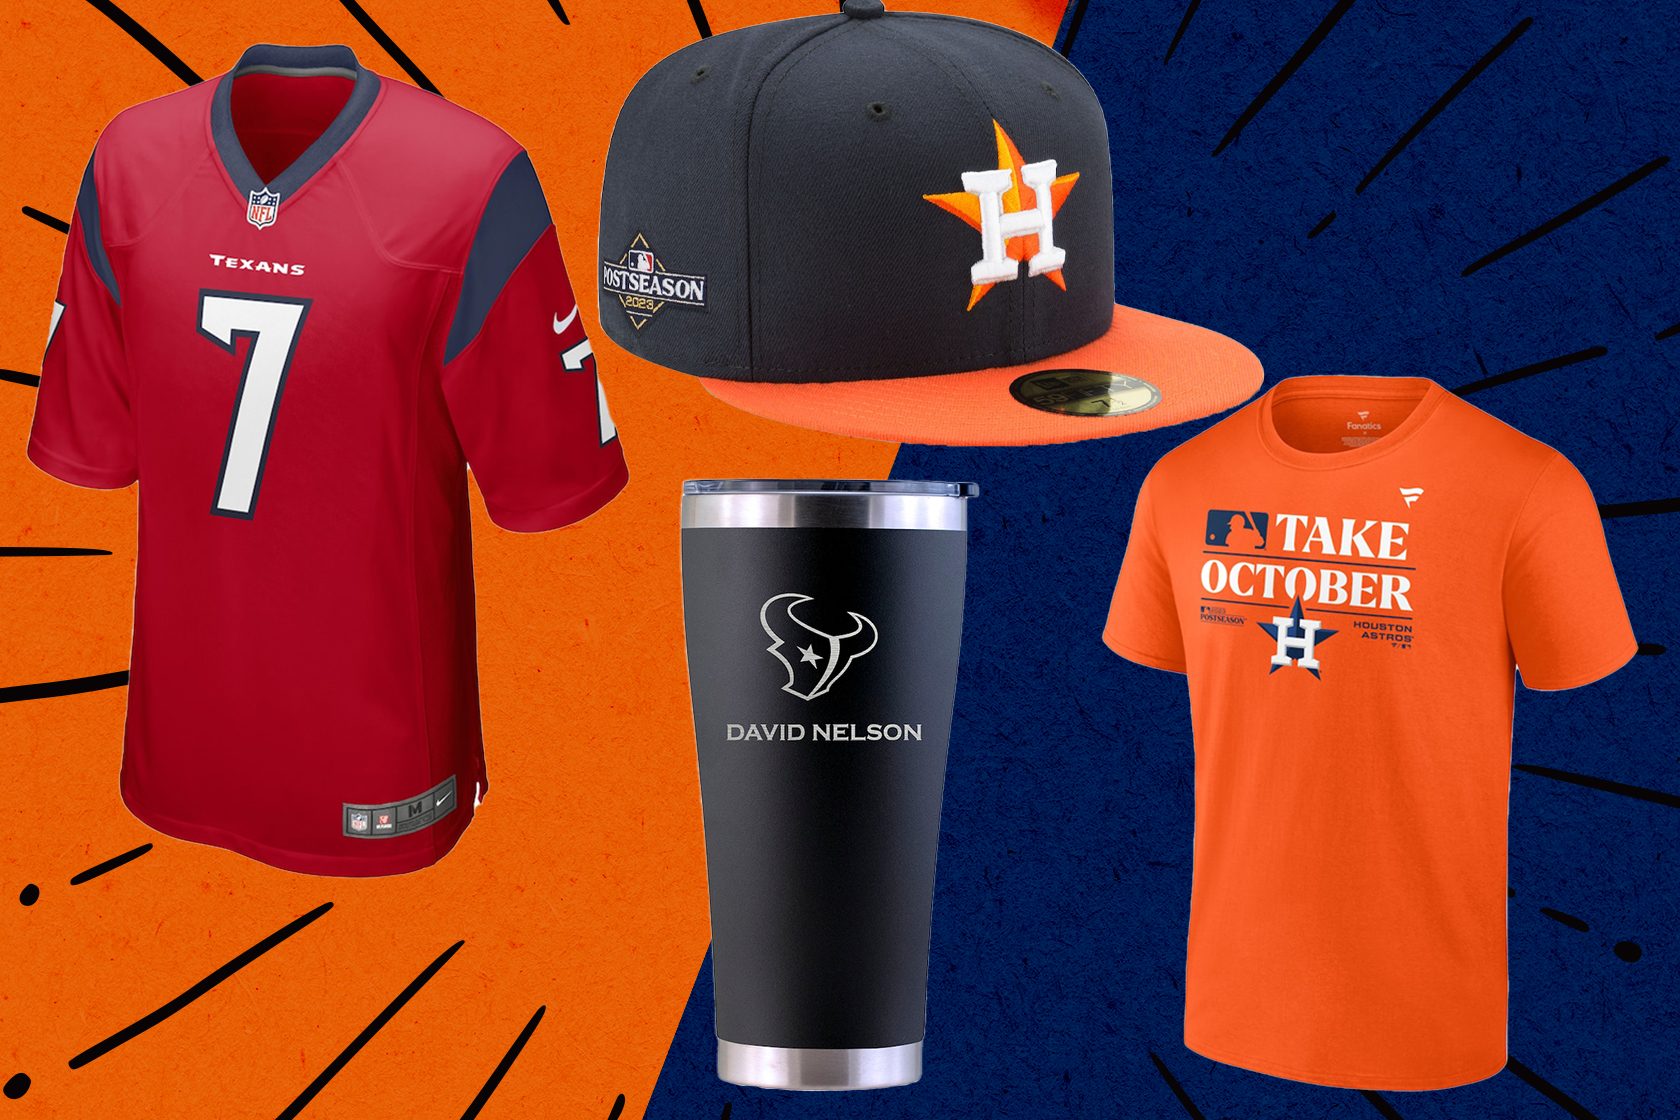 SGG Promos on X: MLB PLAYOFFS SPECIAL, @Fanatics, 65% OFF HOUSTON GEAR🏆  ASTROS FANS‼️ Gear up for MLB PLAYOFFS with Fanatics latest offer and get  up to 65% OFF using THIS PROMO